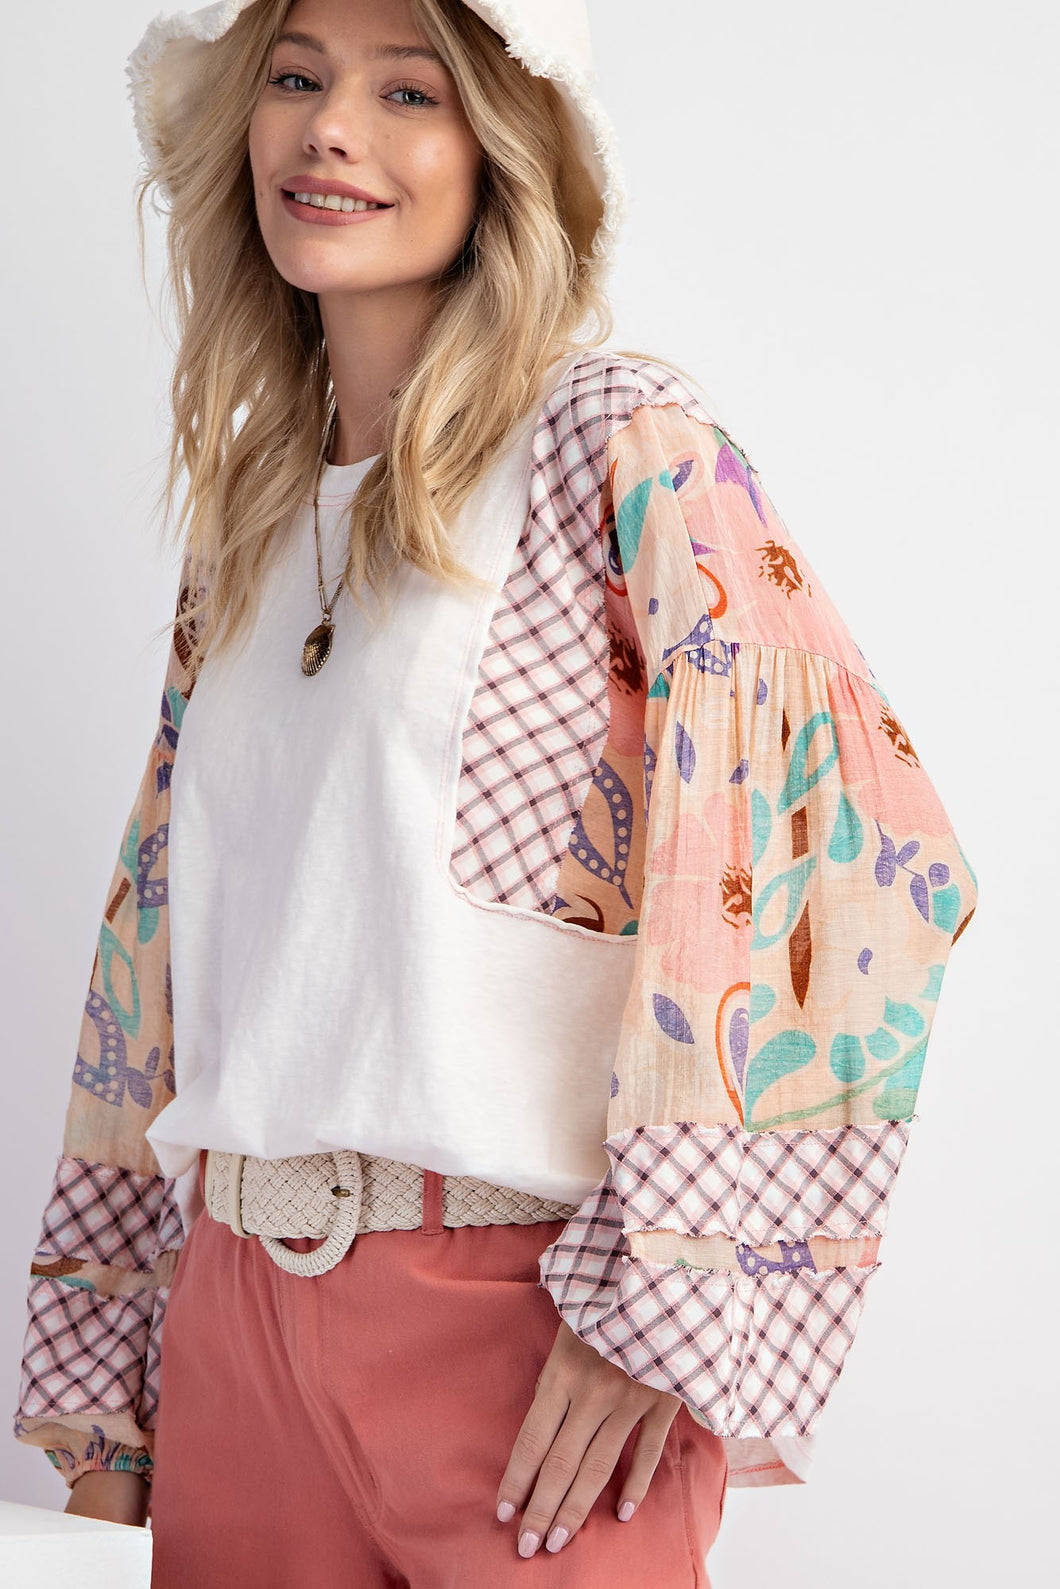 Easel Mineral Washed Top with Contrasting Print Sleeves in White Shirts & Tops Easel   